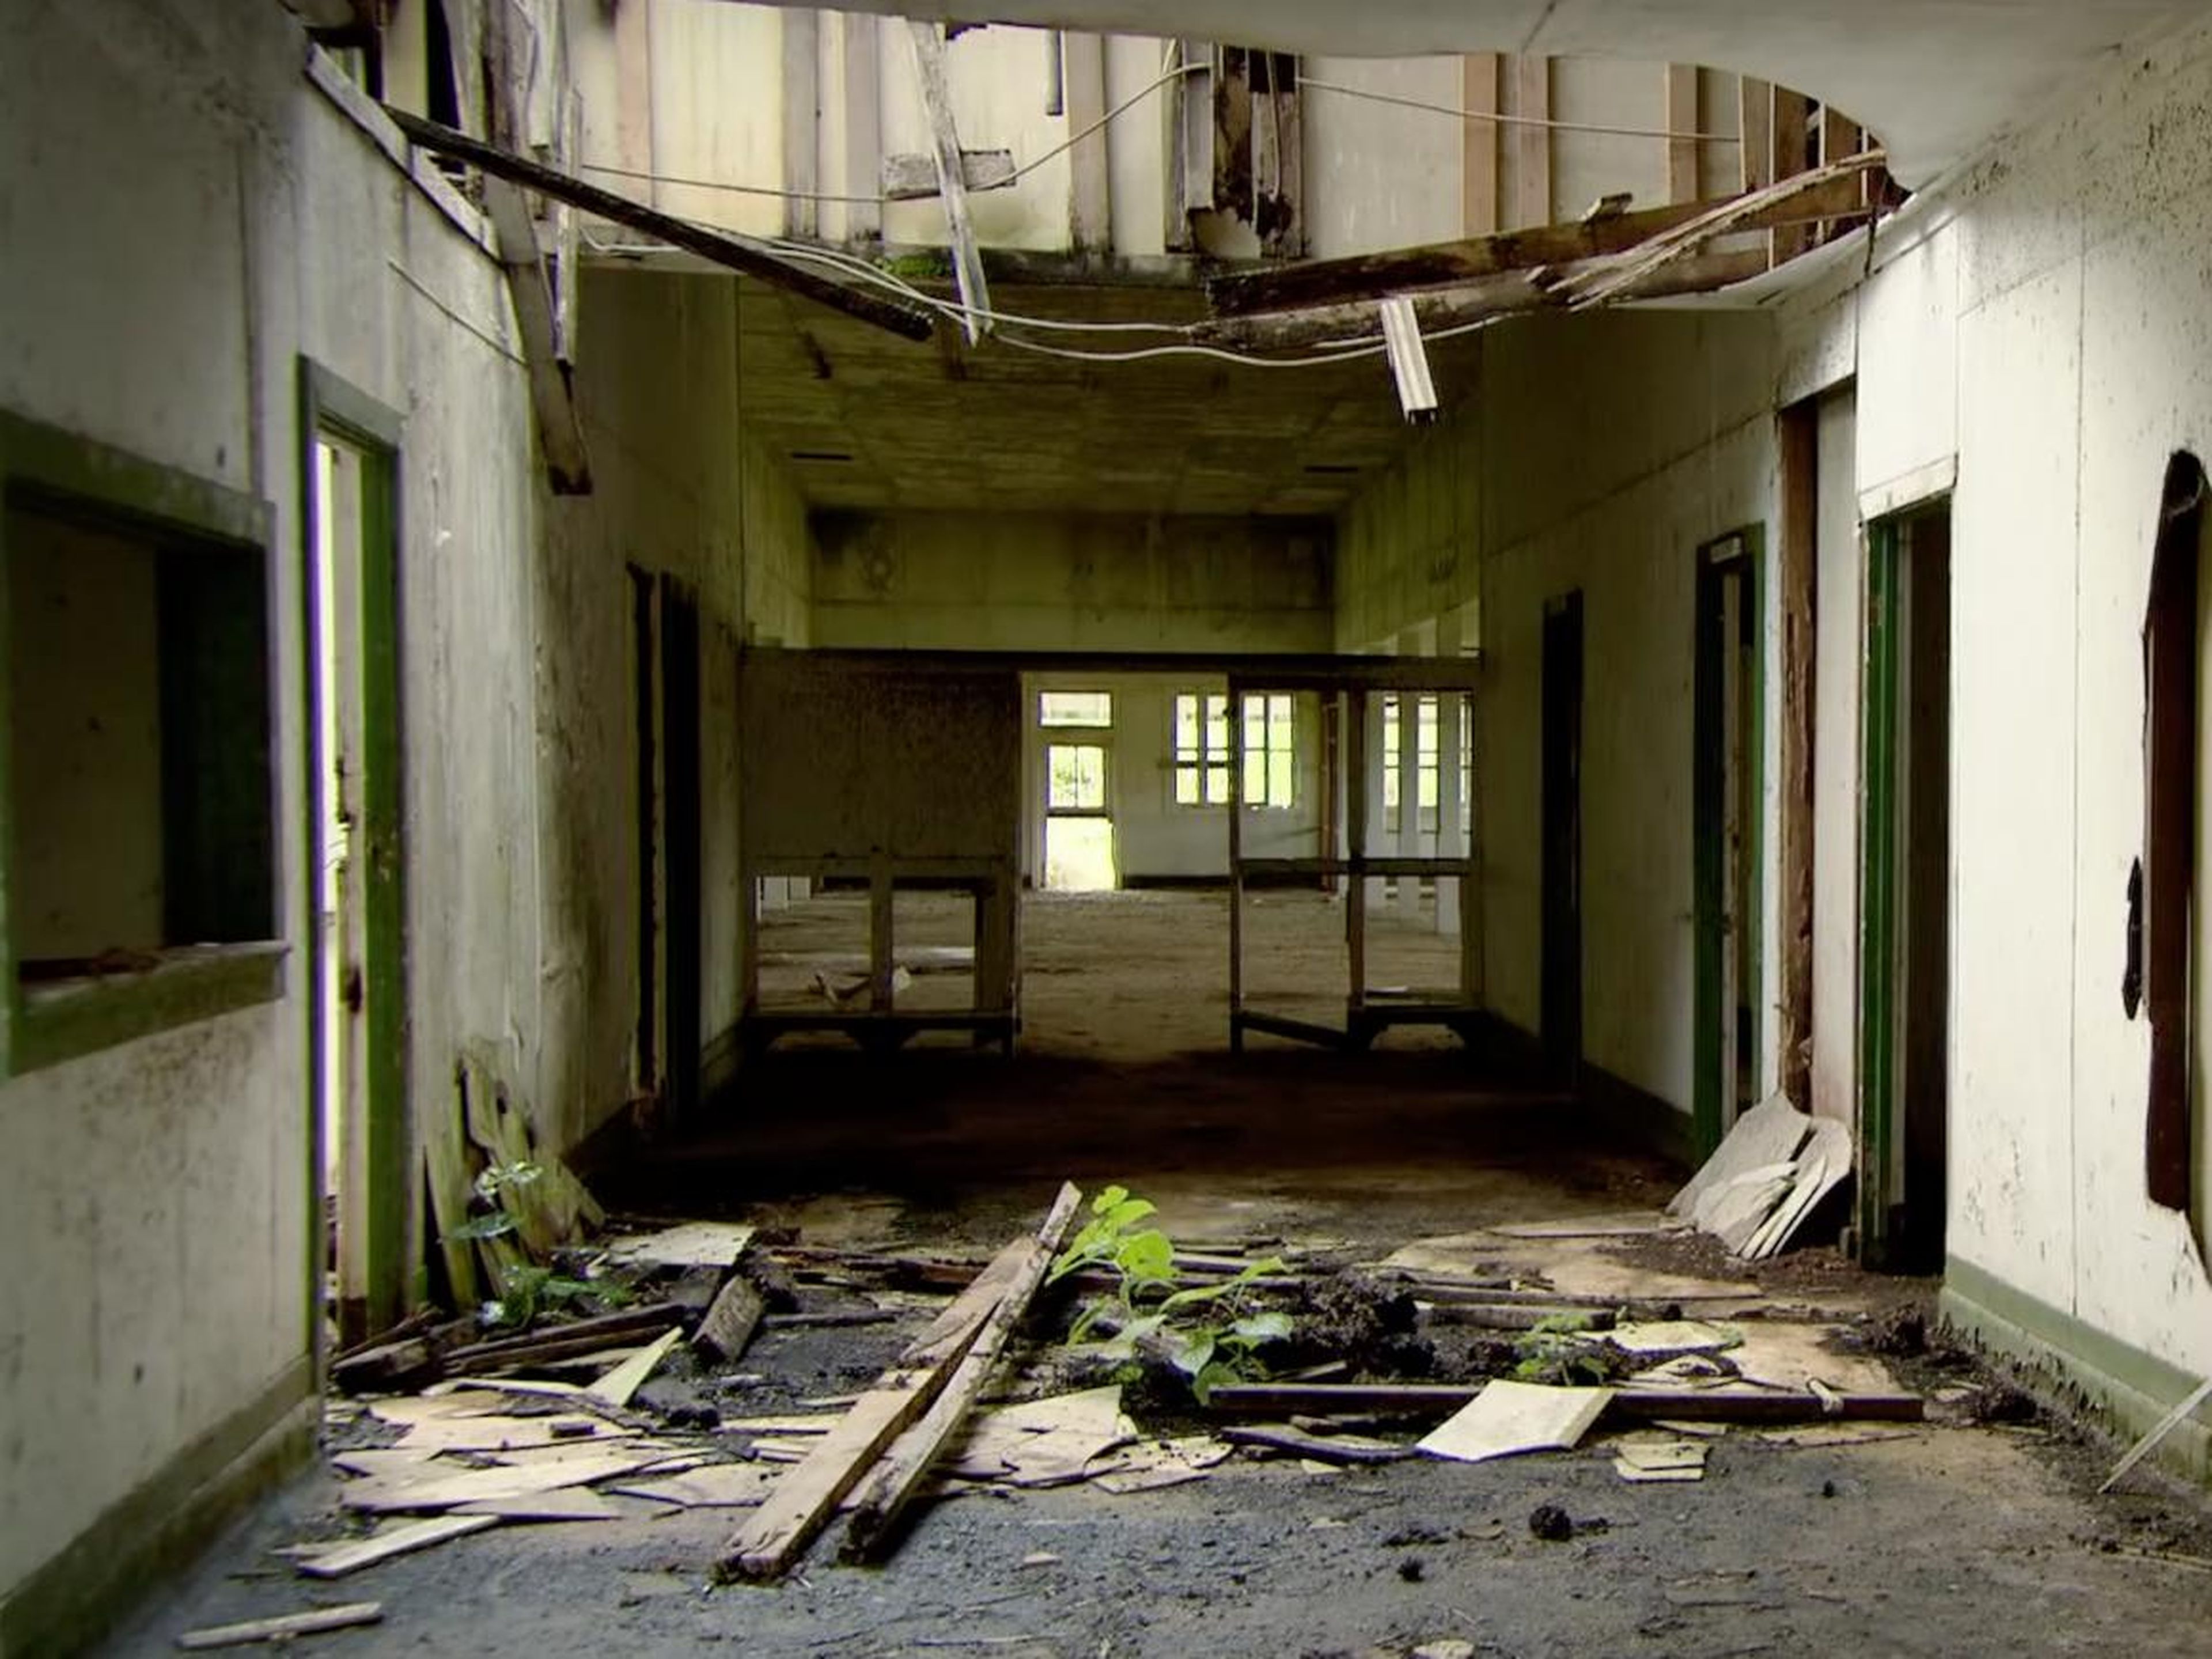 The decaying hospital in Fordlandia.